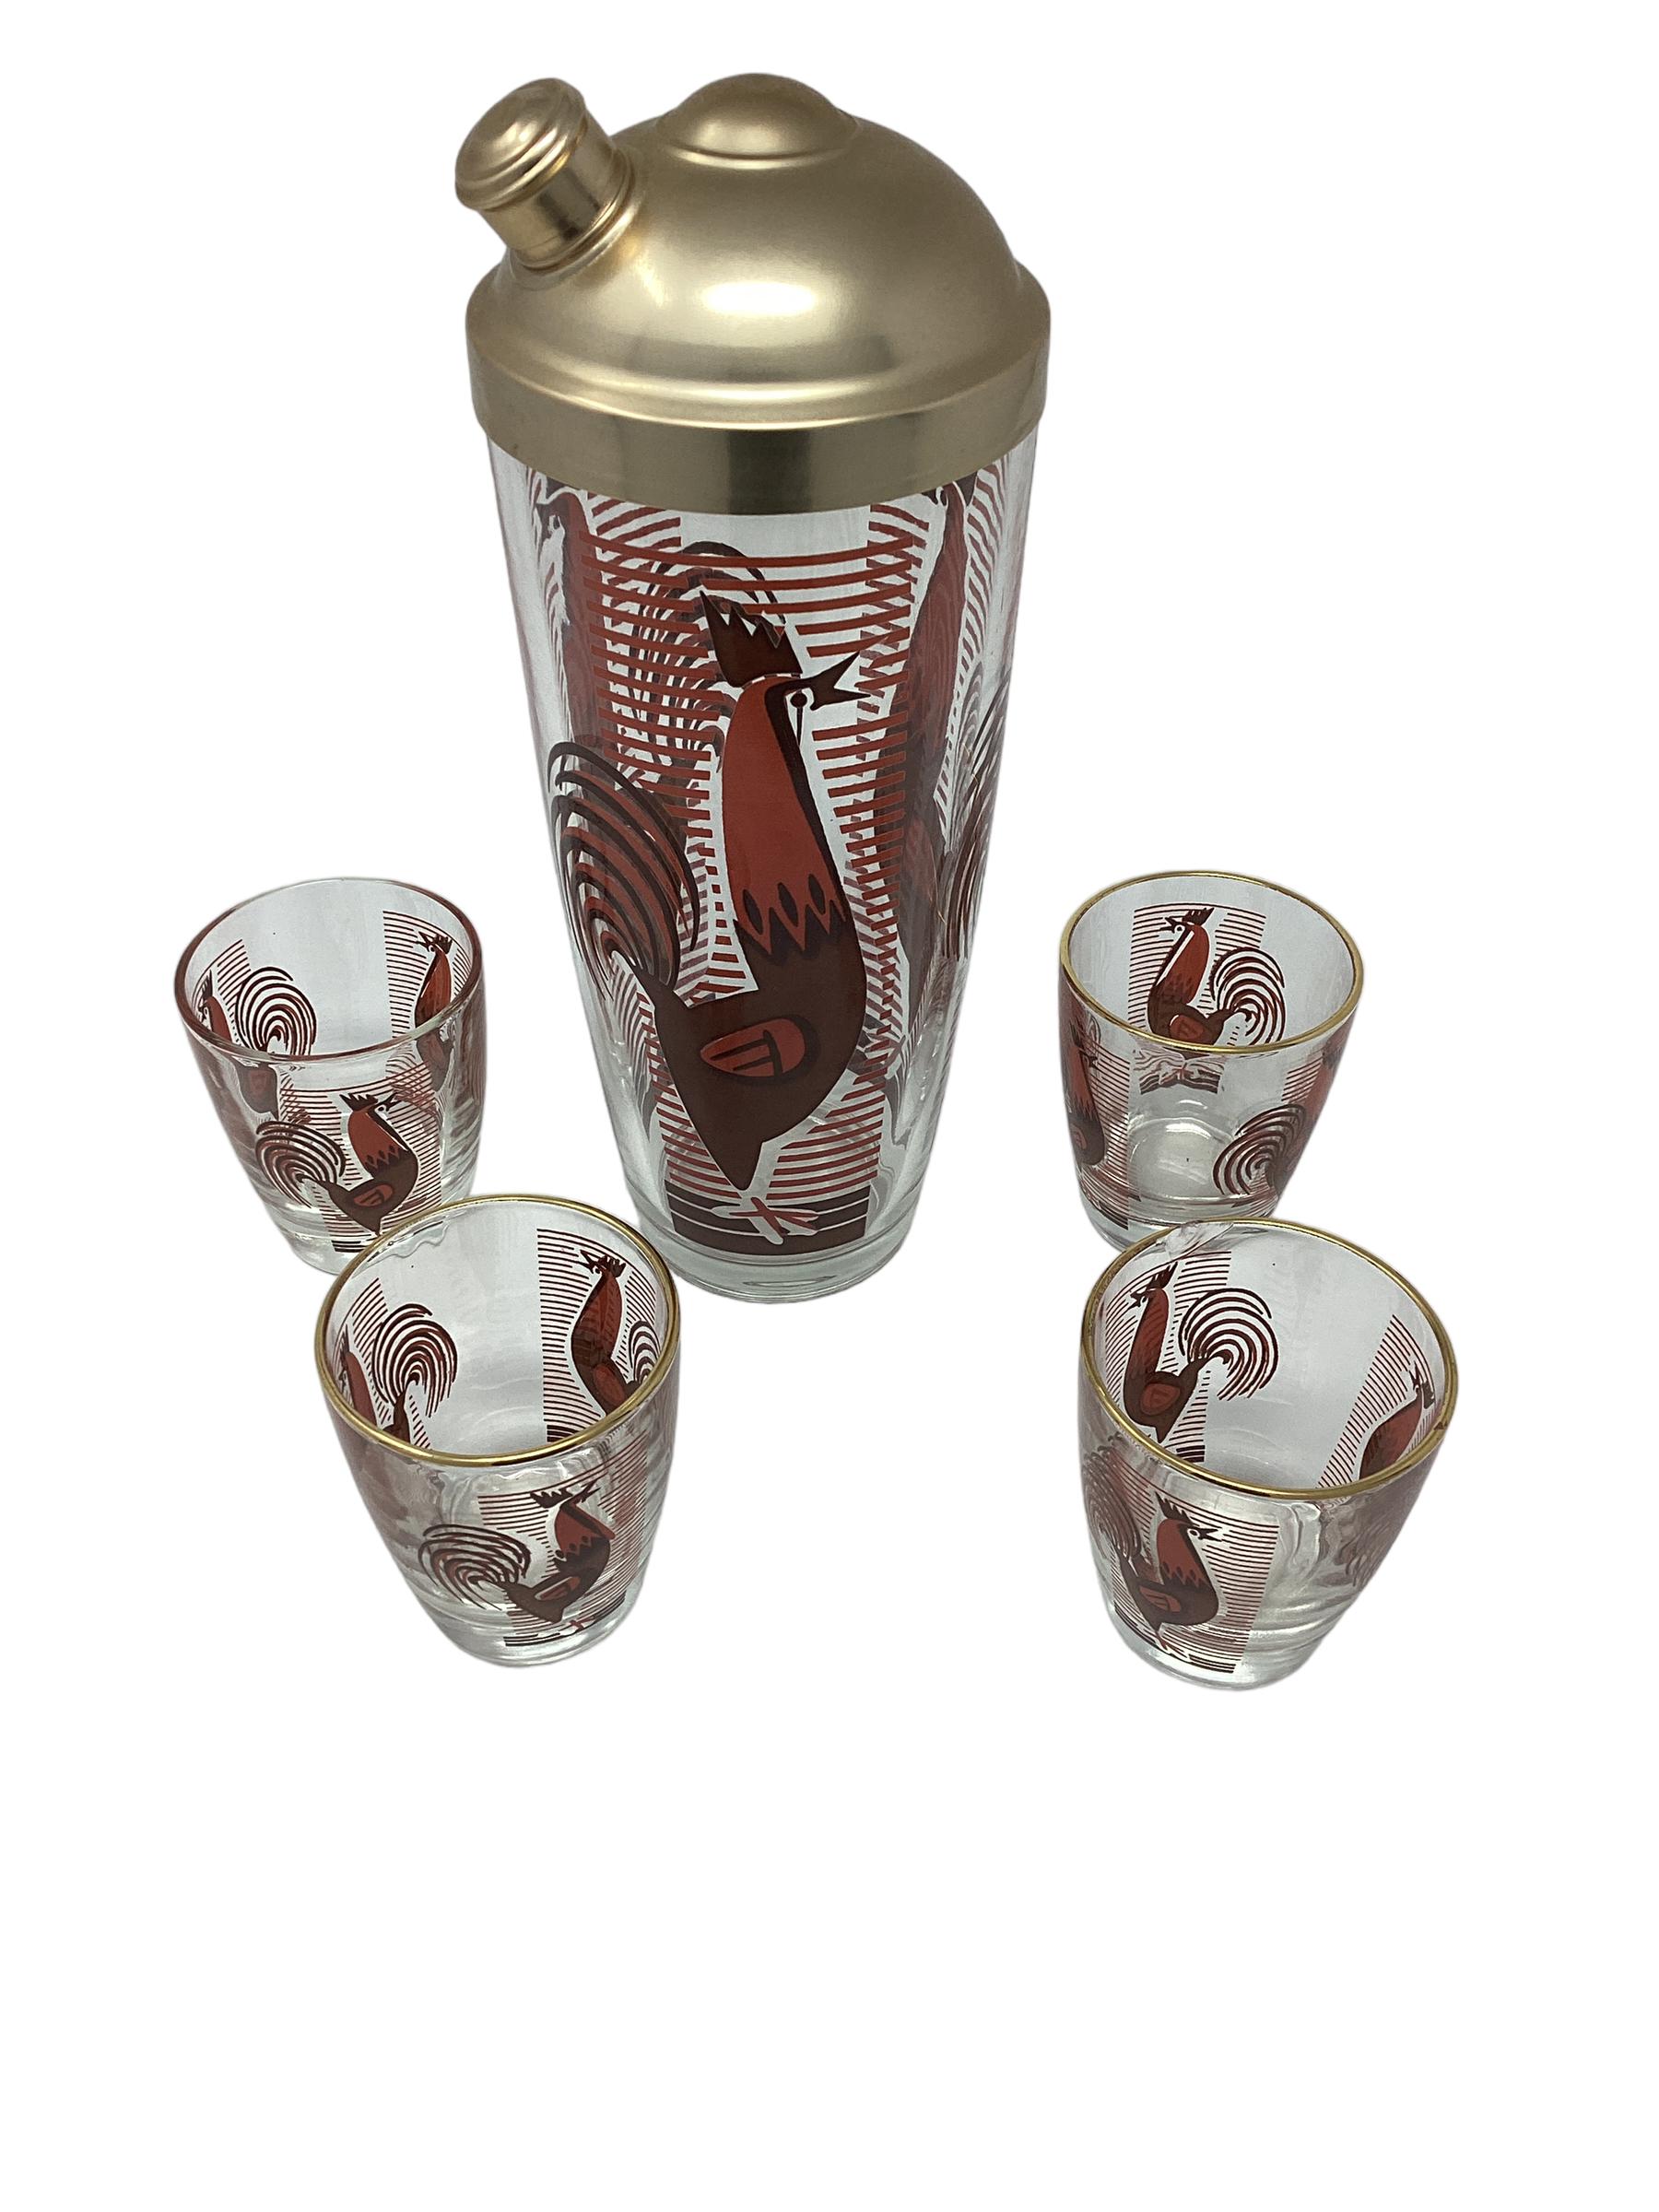 Vintage Art Deco 5 Piece Dyball Cocktail Set with Stylized Rooster For Sale 4